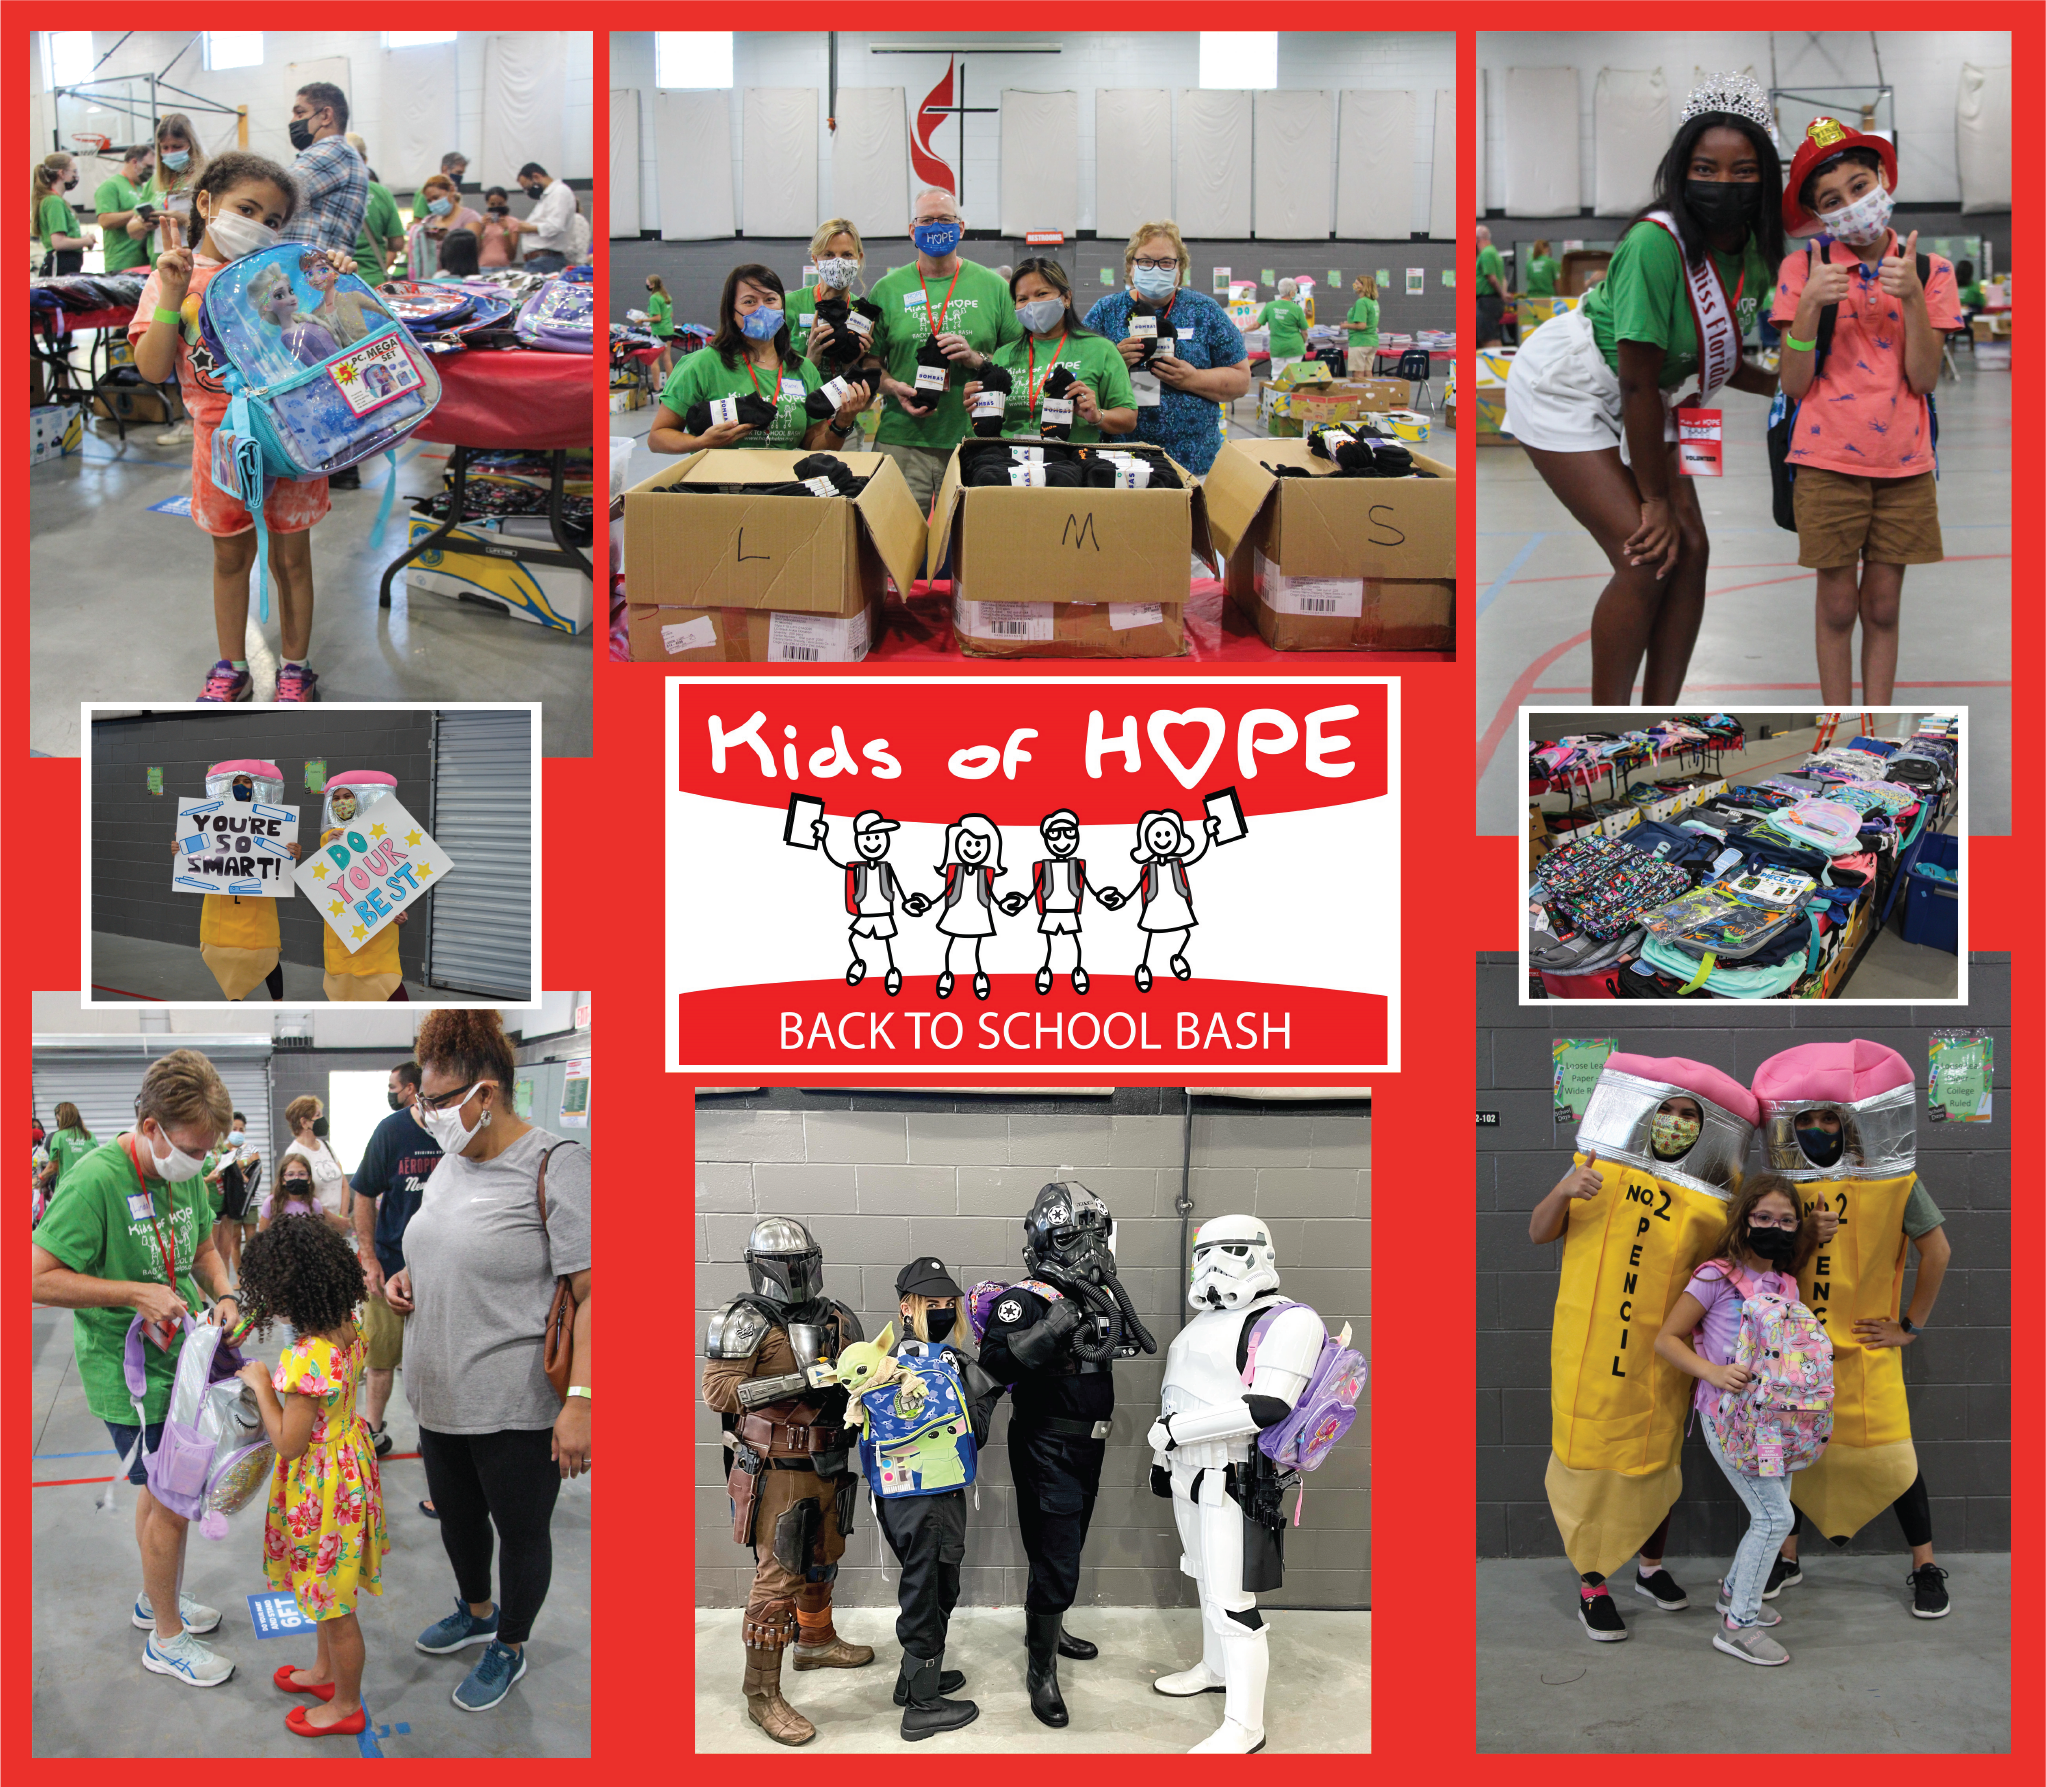 HOPE’s 13th Annual Kids of HOPE Back to School Bash